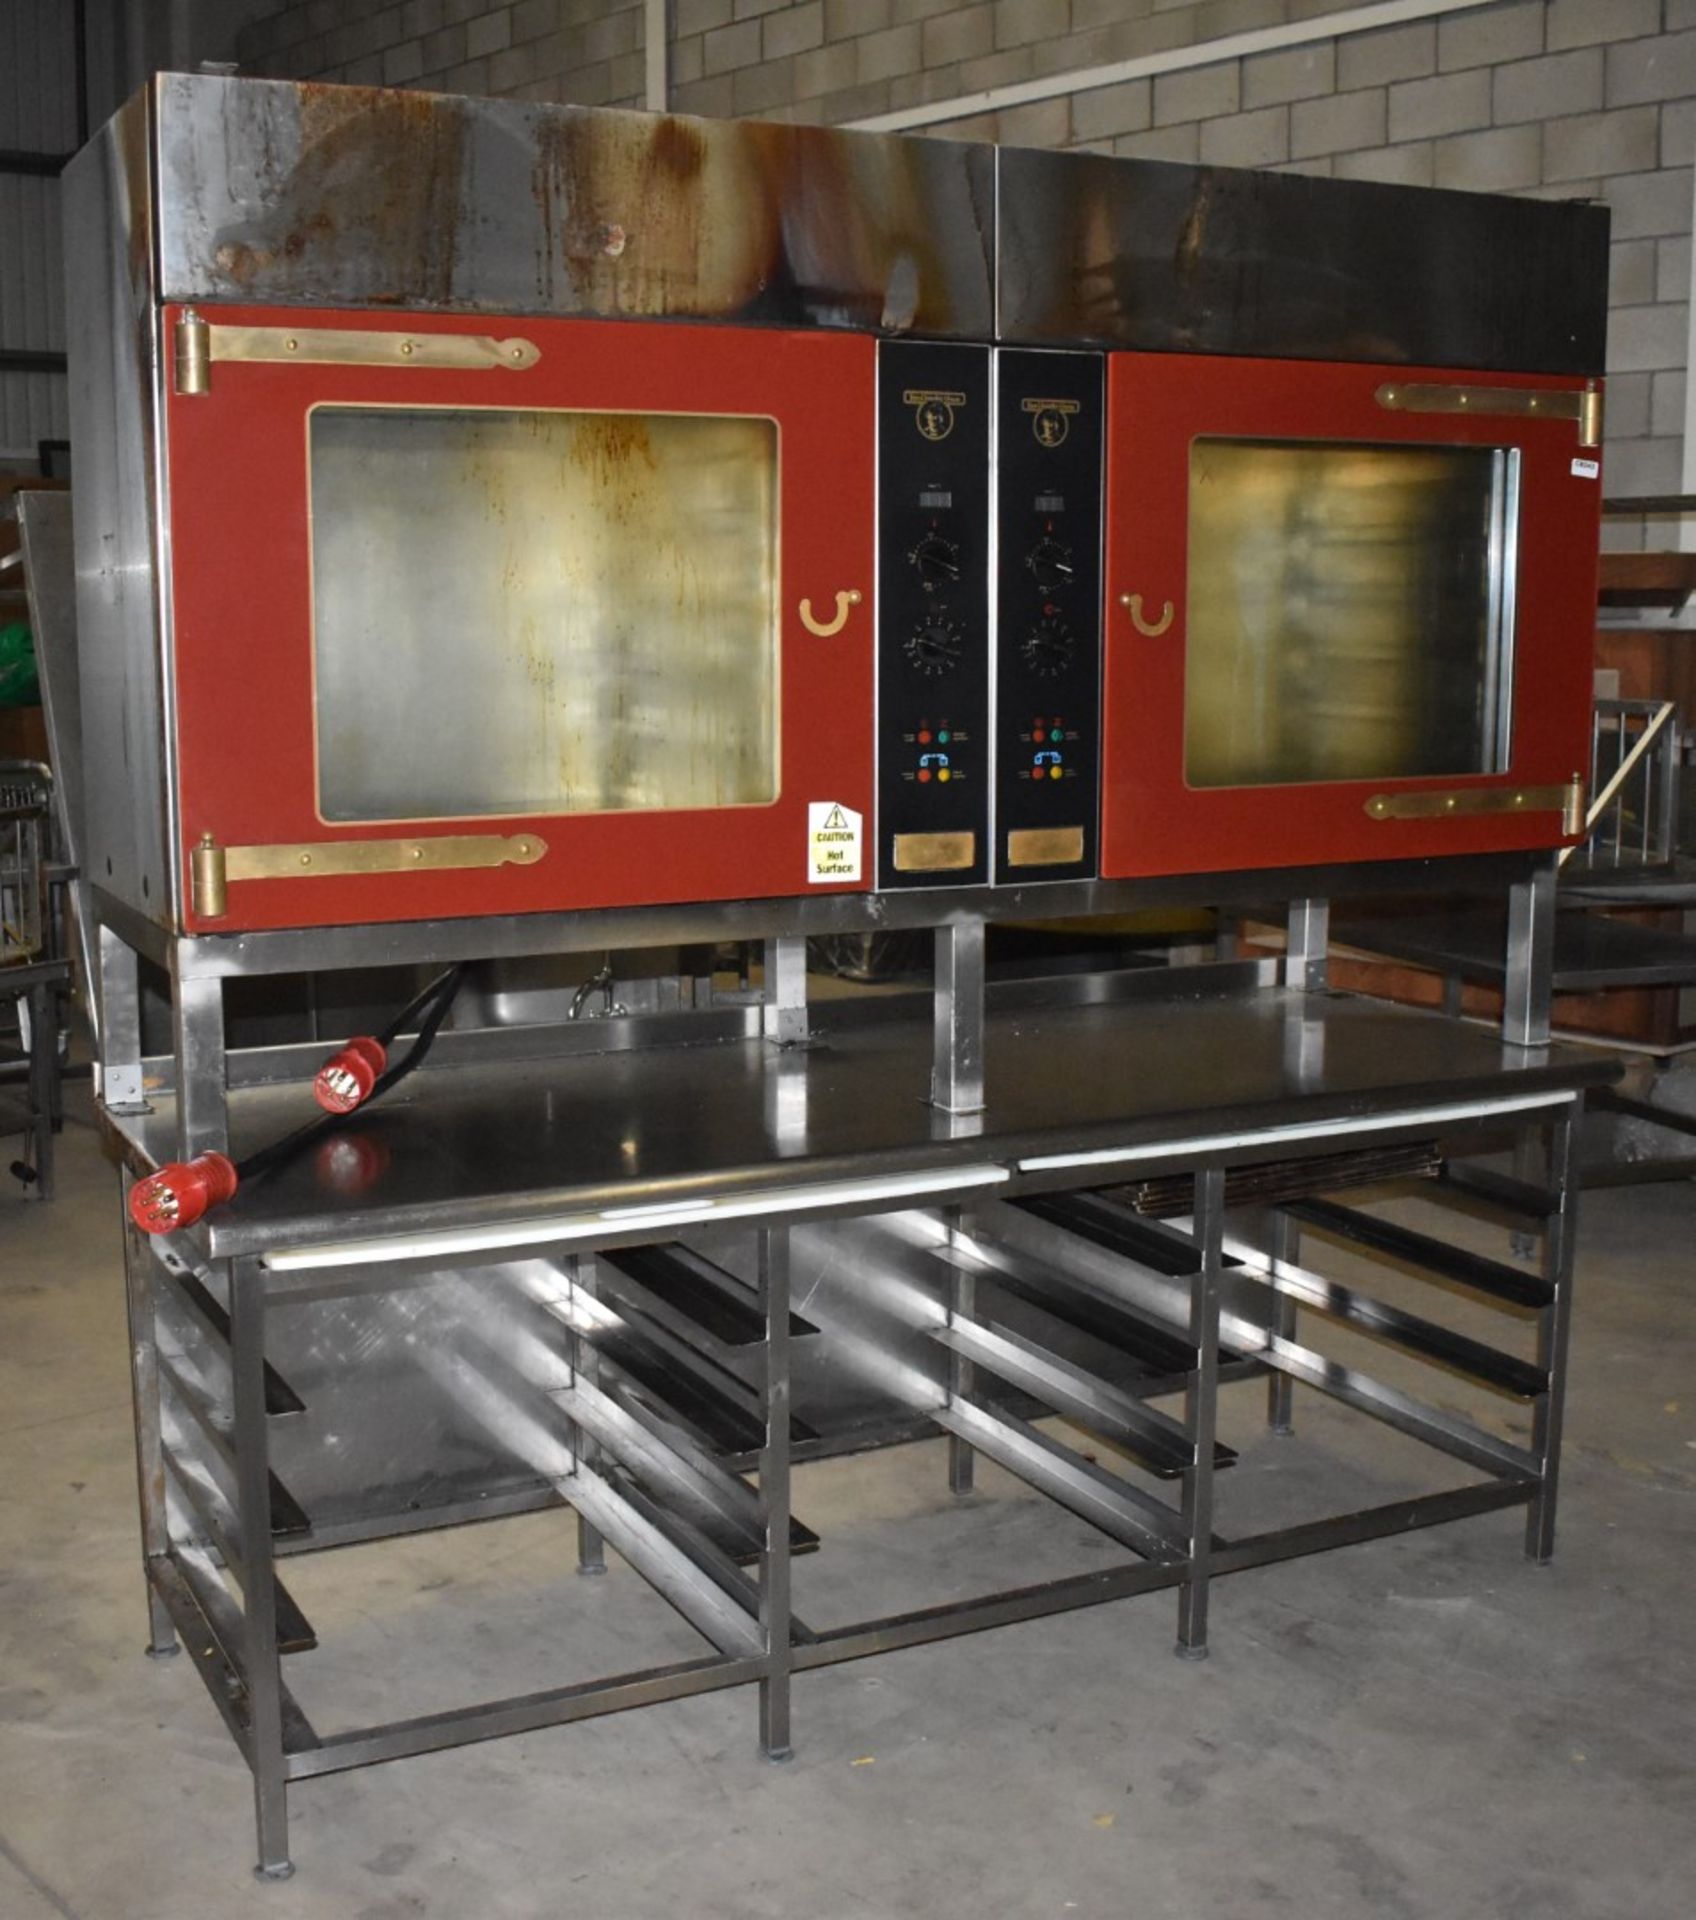 1 x Tom Chandley Double C5 60X40 Pie Oven With Stainless Steel Baking Tray Prep Bench - CL455 - - Image 7 of 18